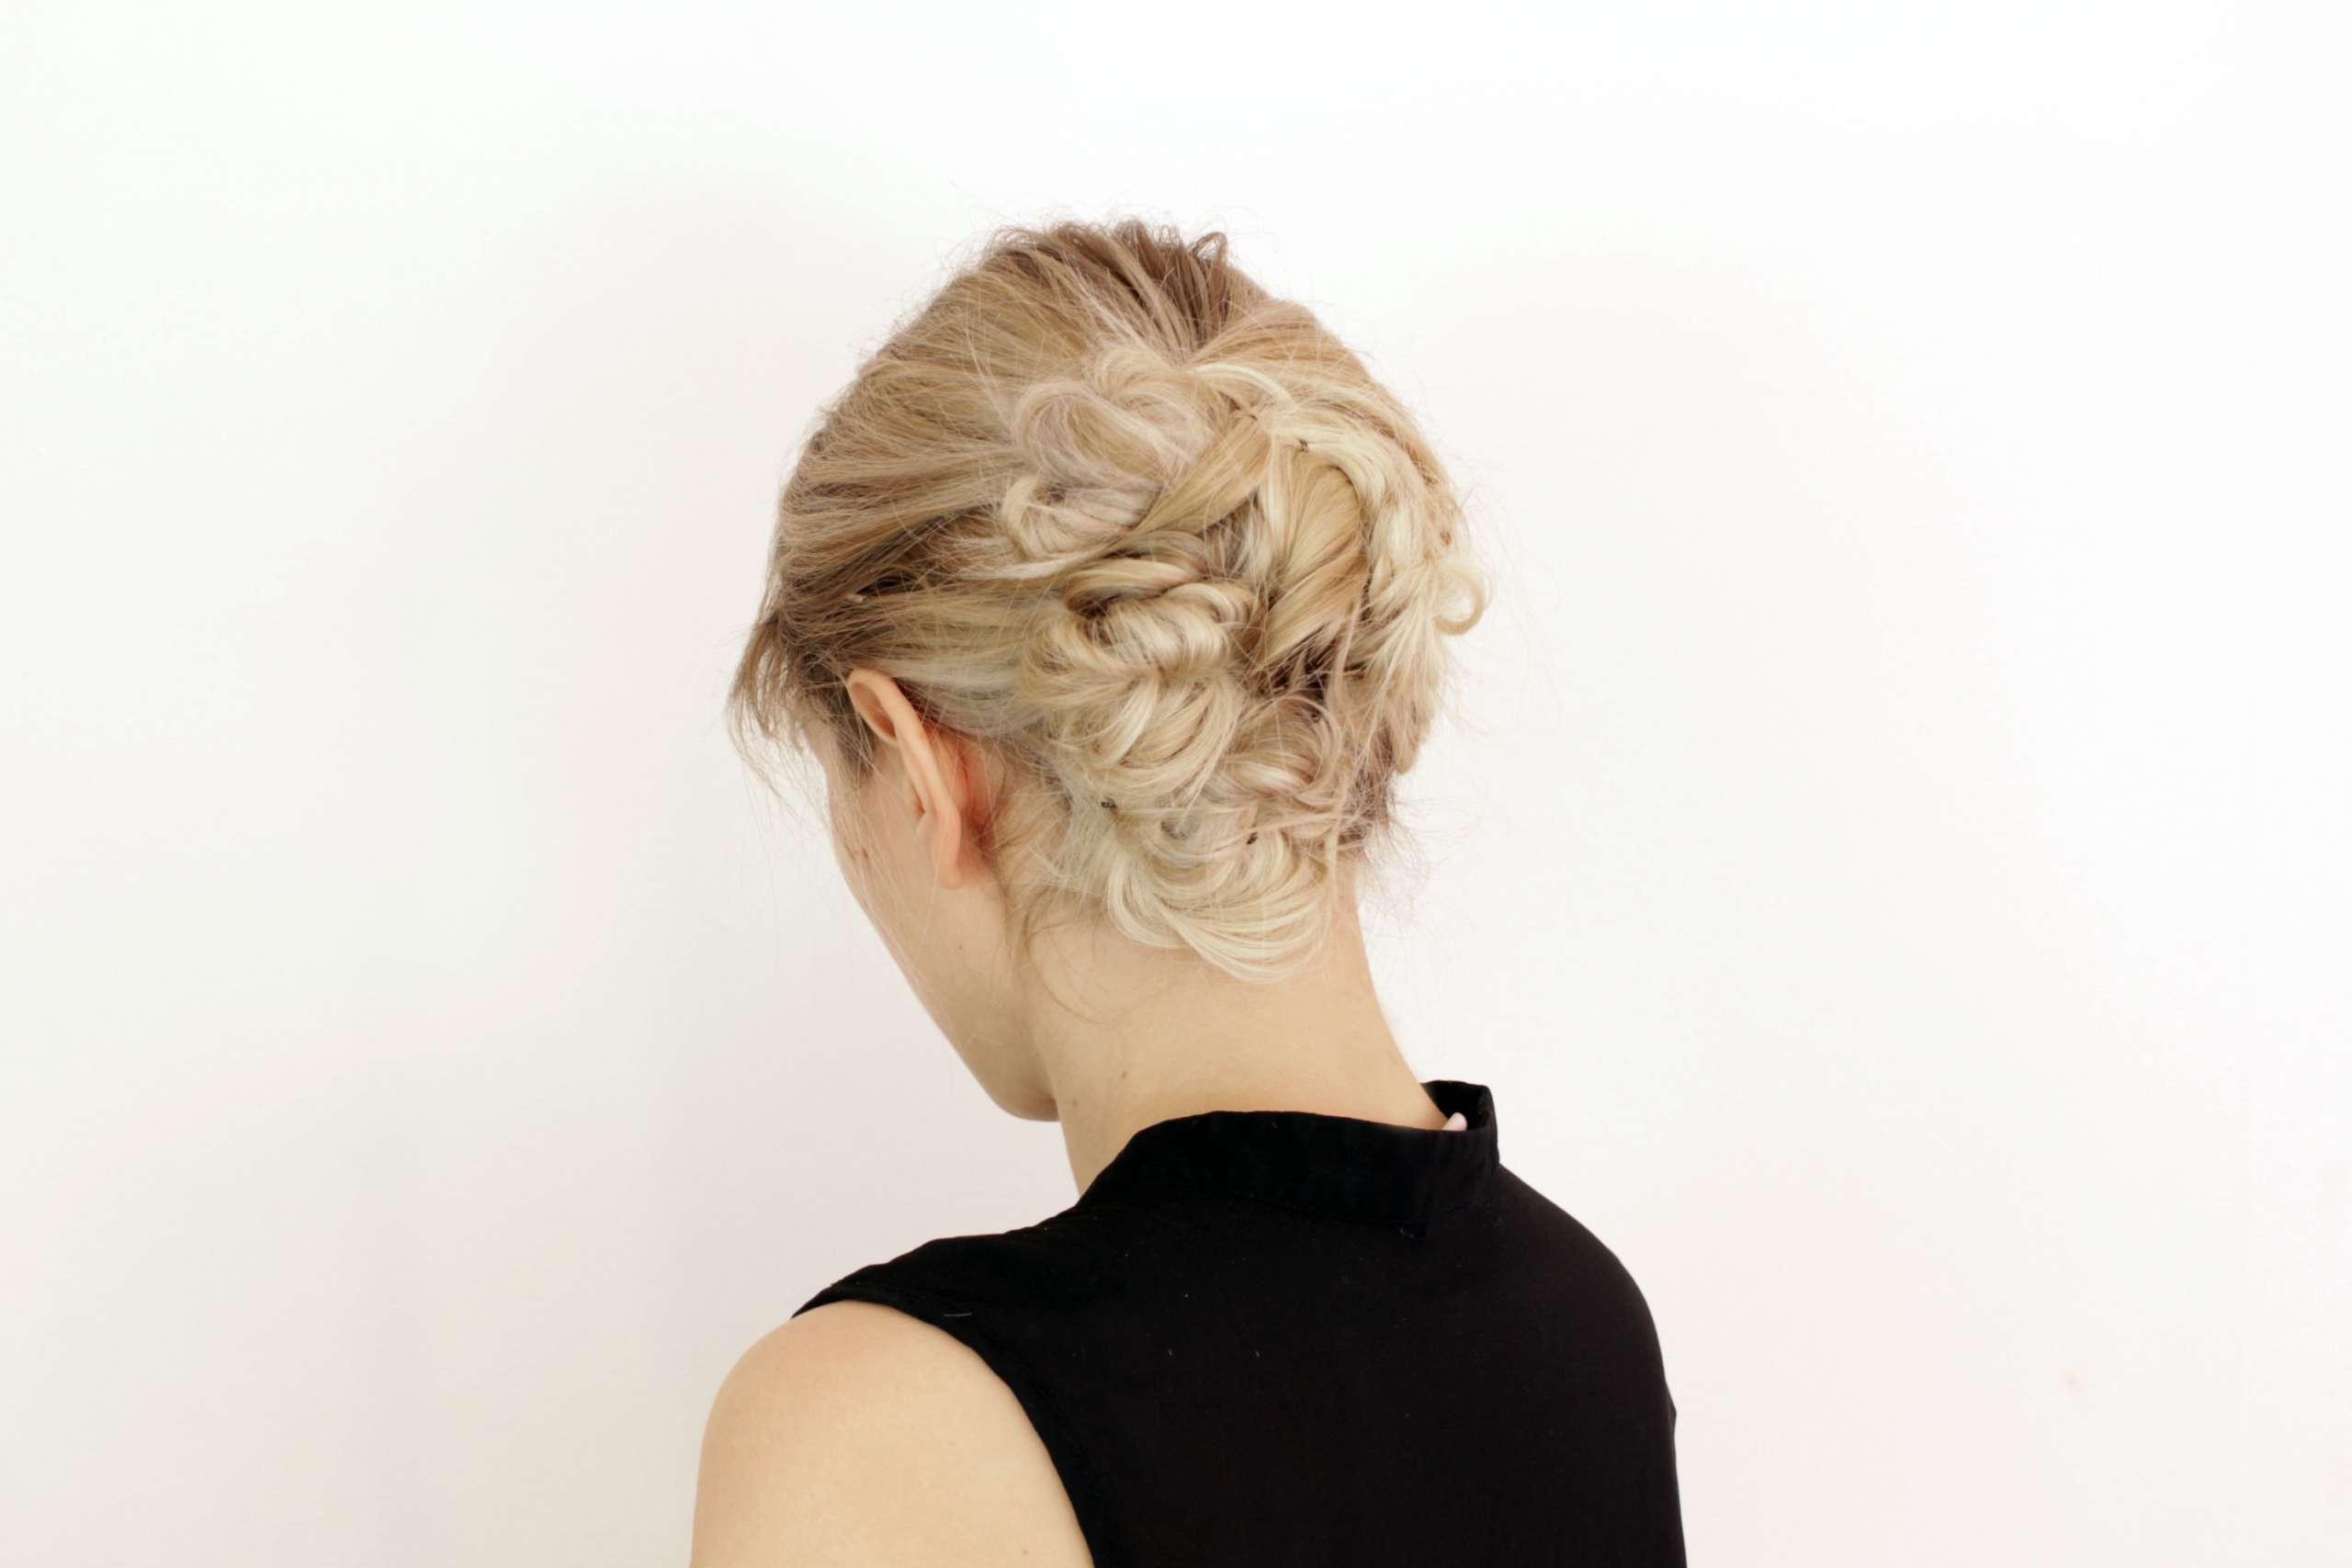 Woman with elegant updo